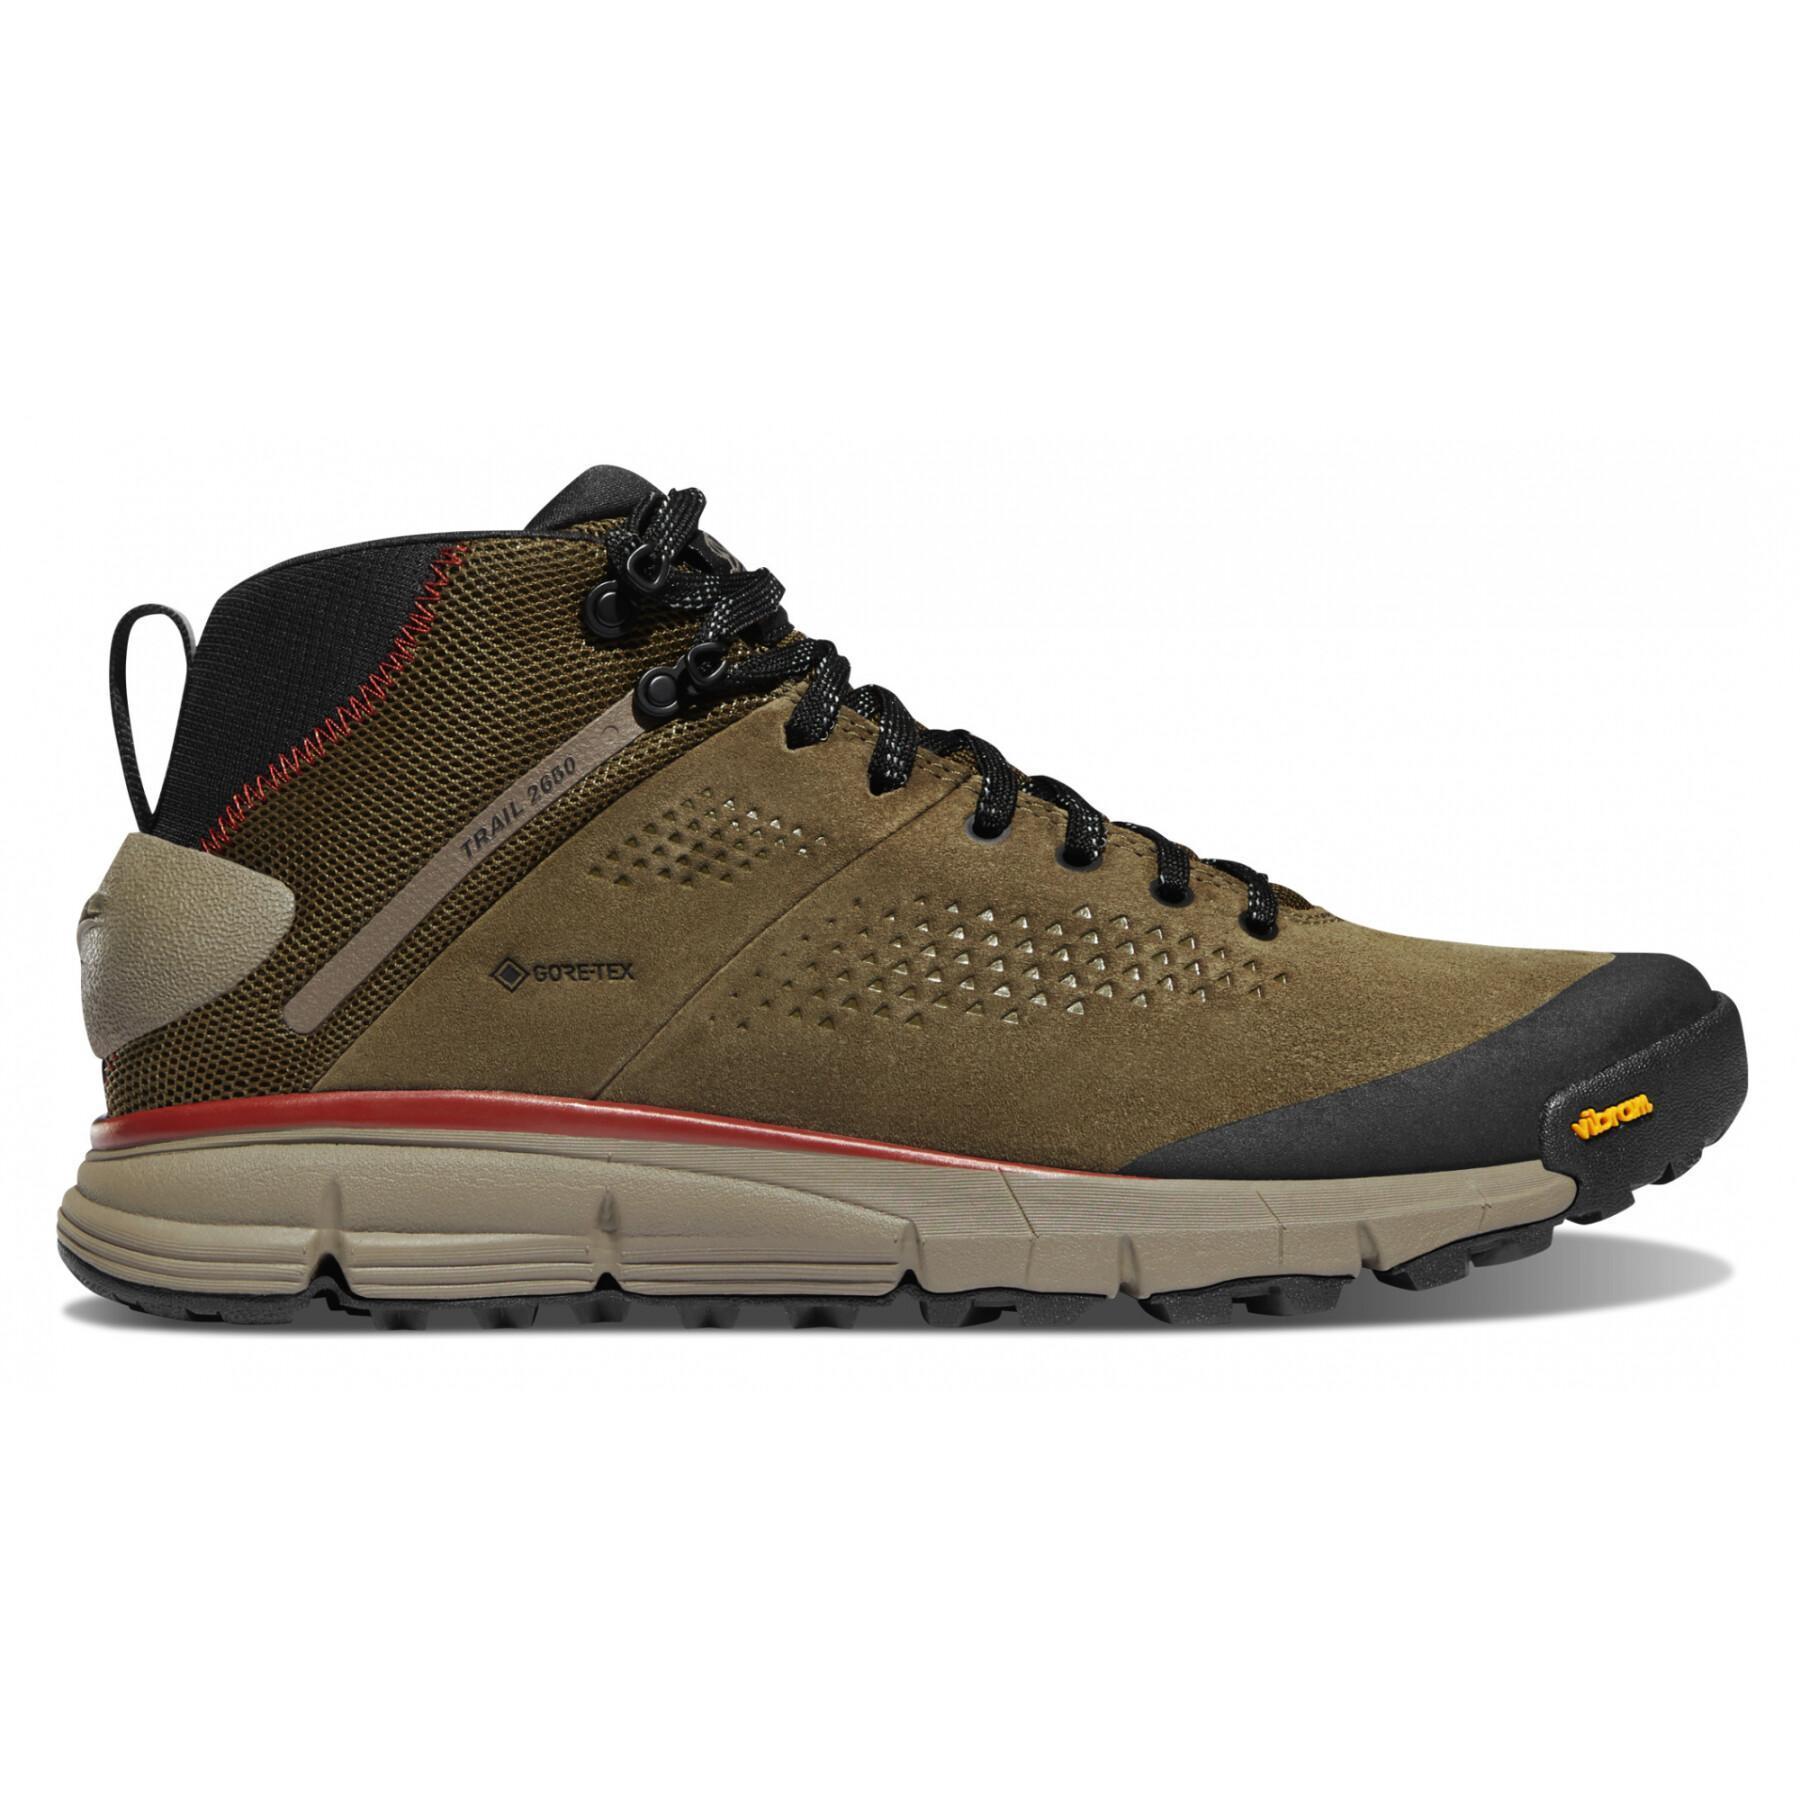 Hiking shoes Danner 2650 GTX Mid 4